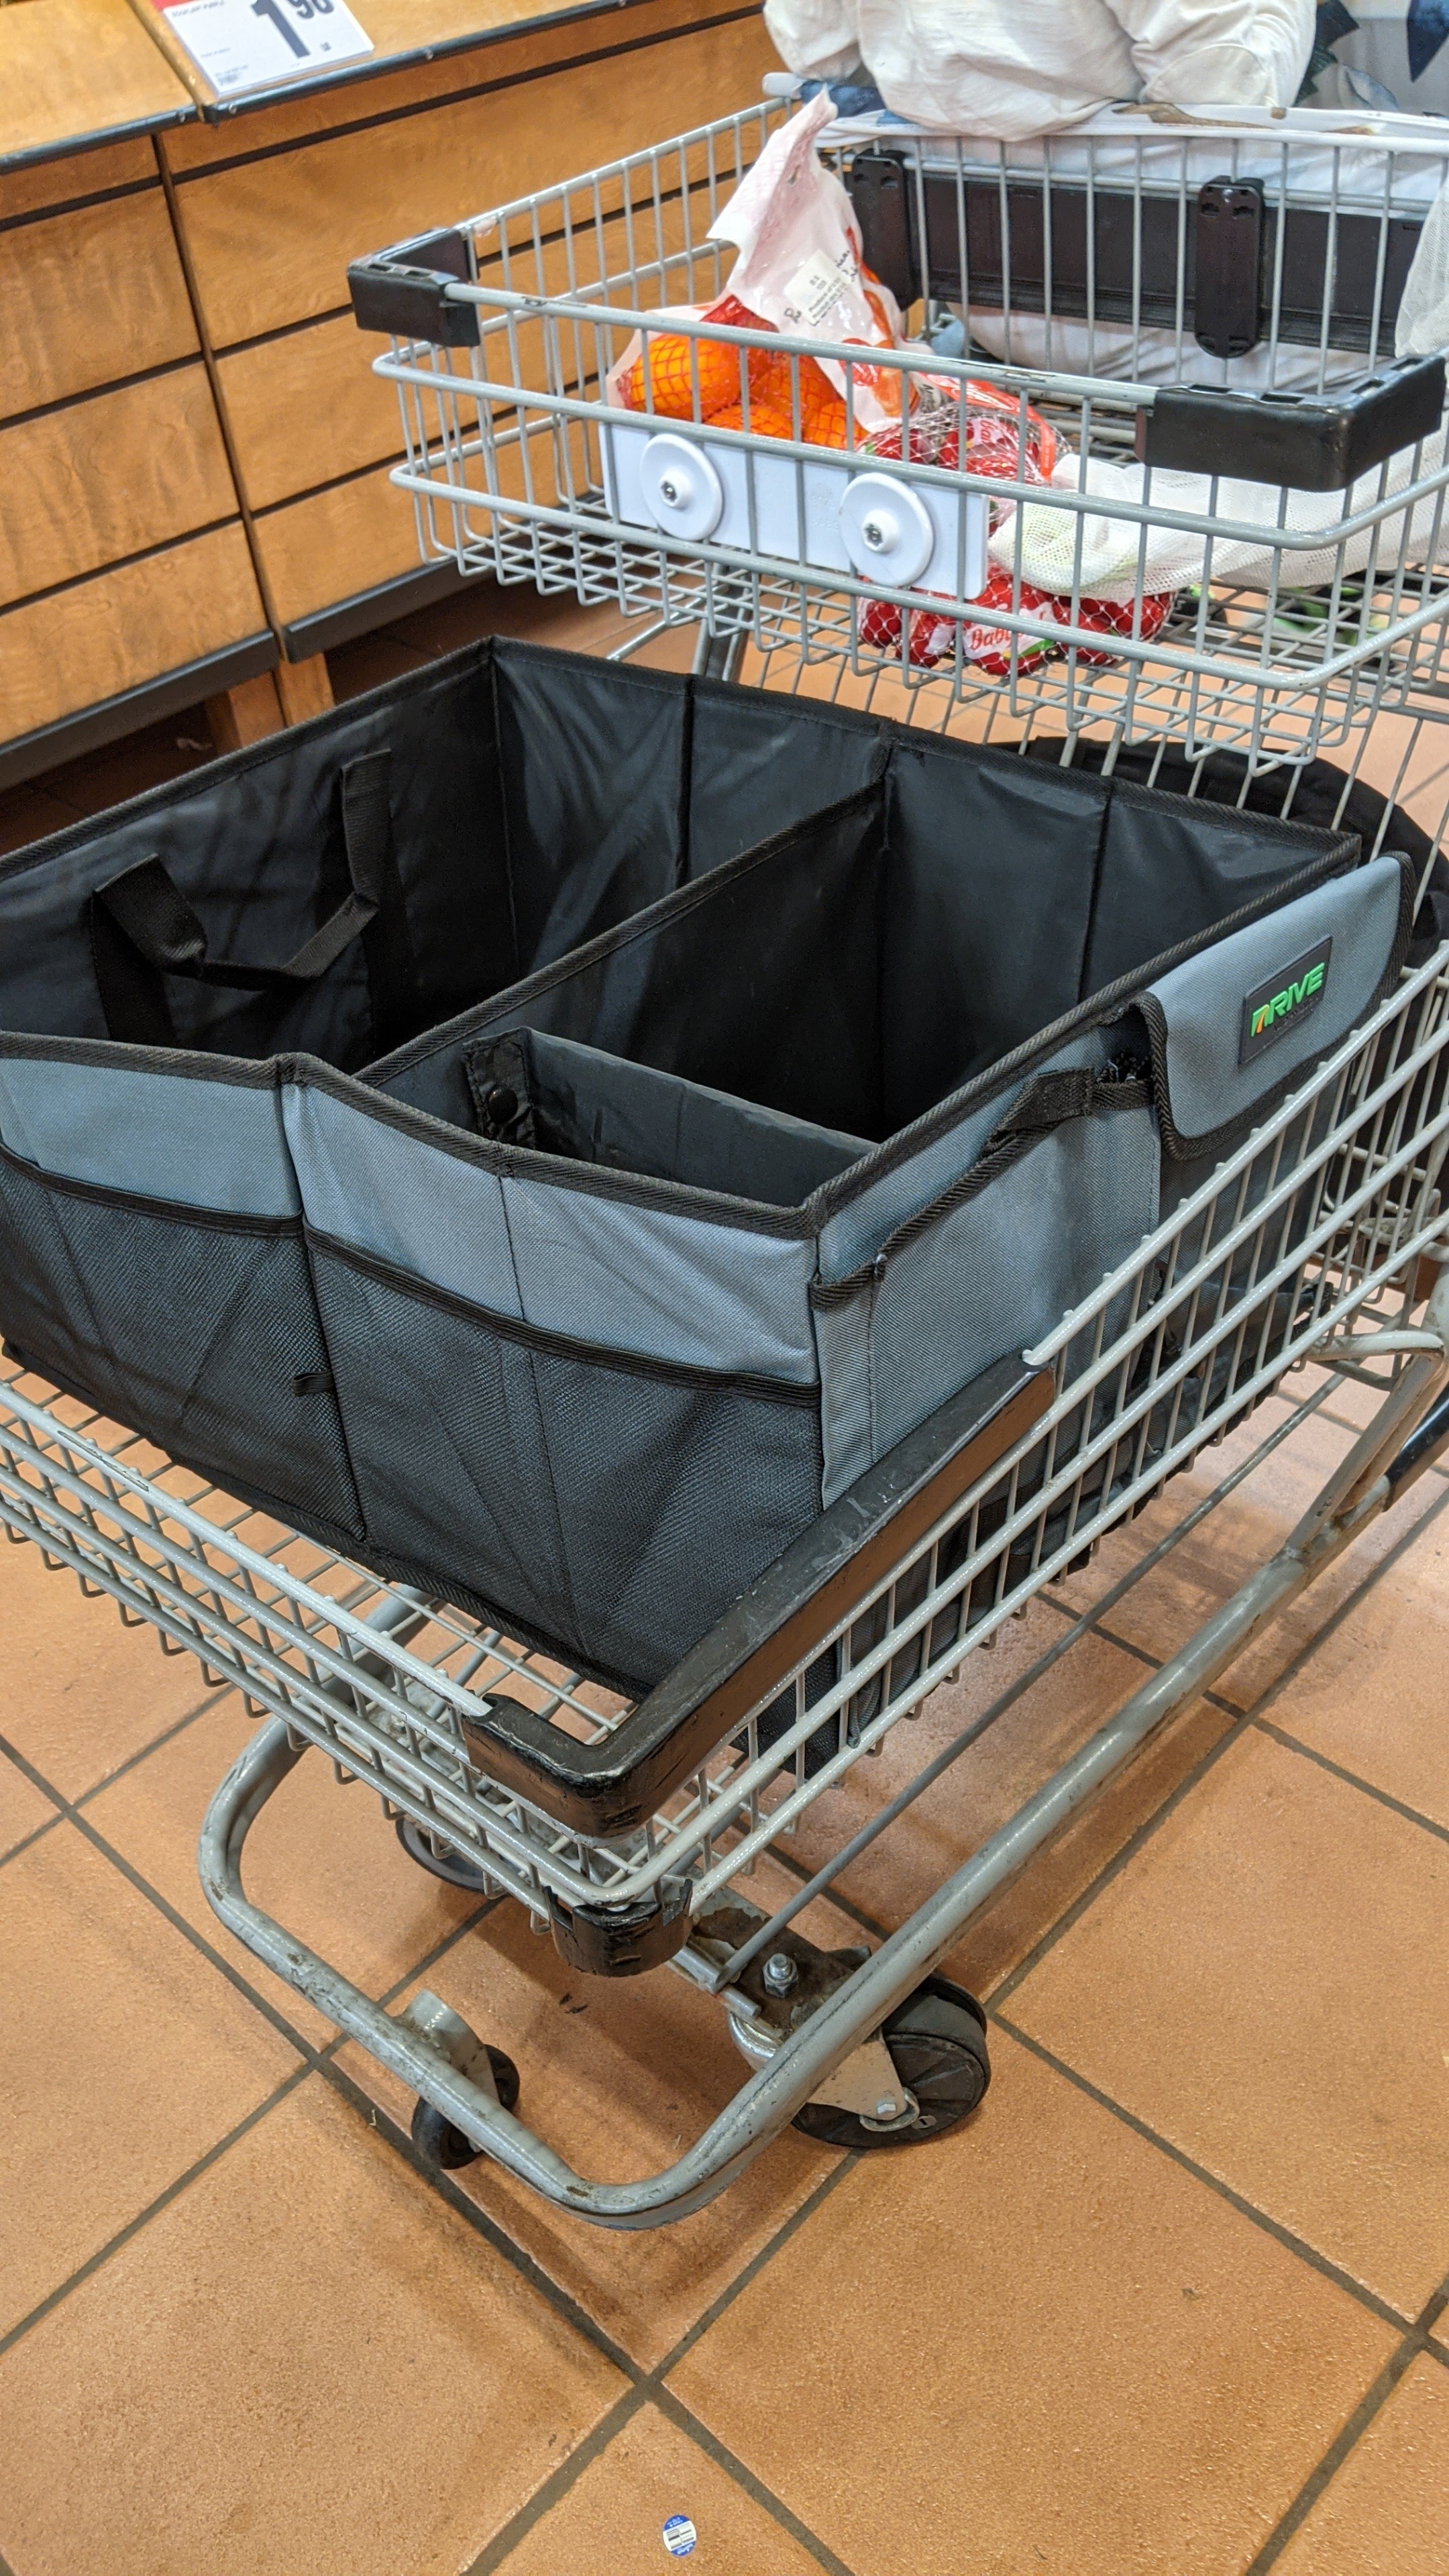 A shopping cart with a large fabric box filled with groceries in the bottom basket